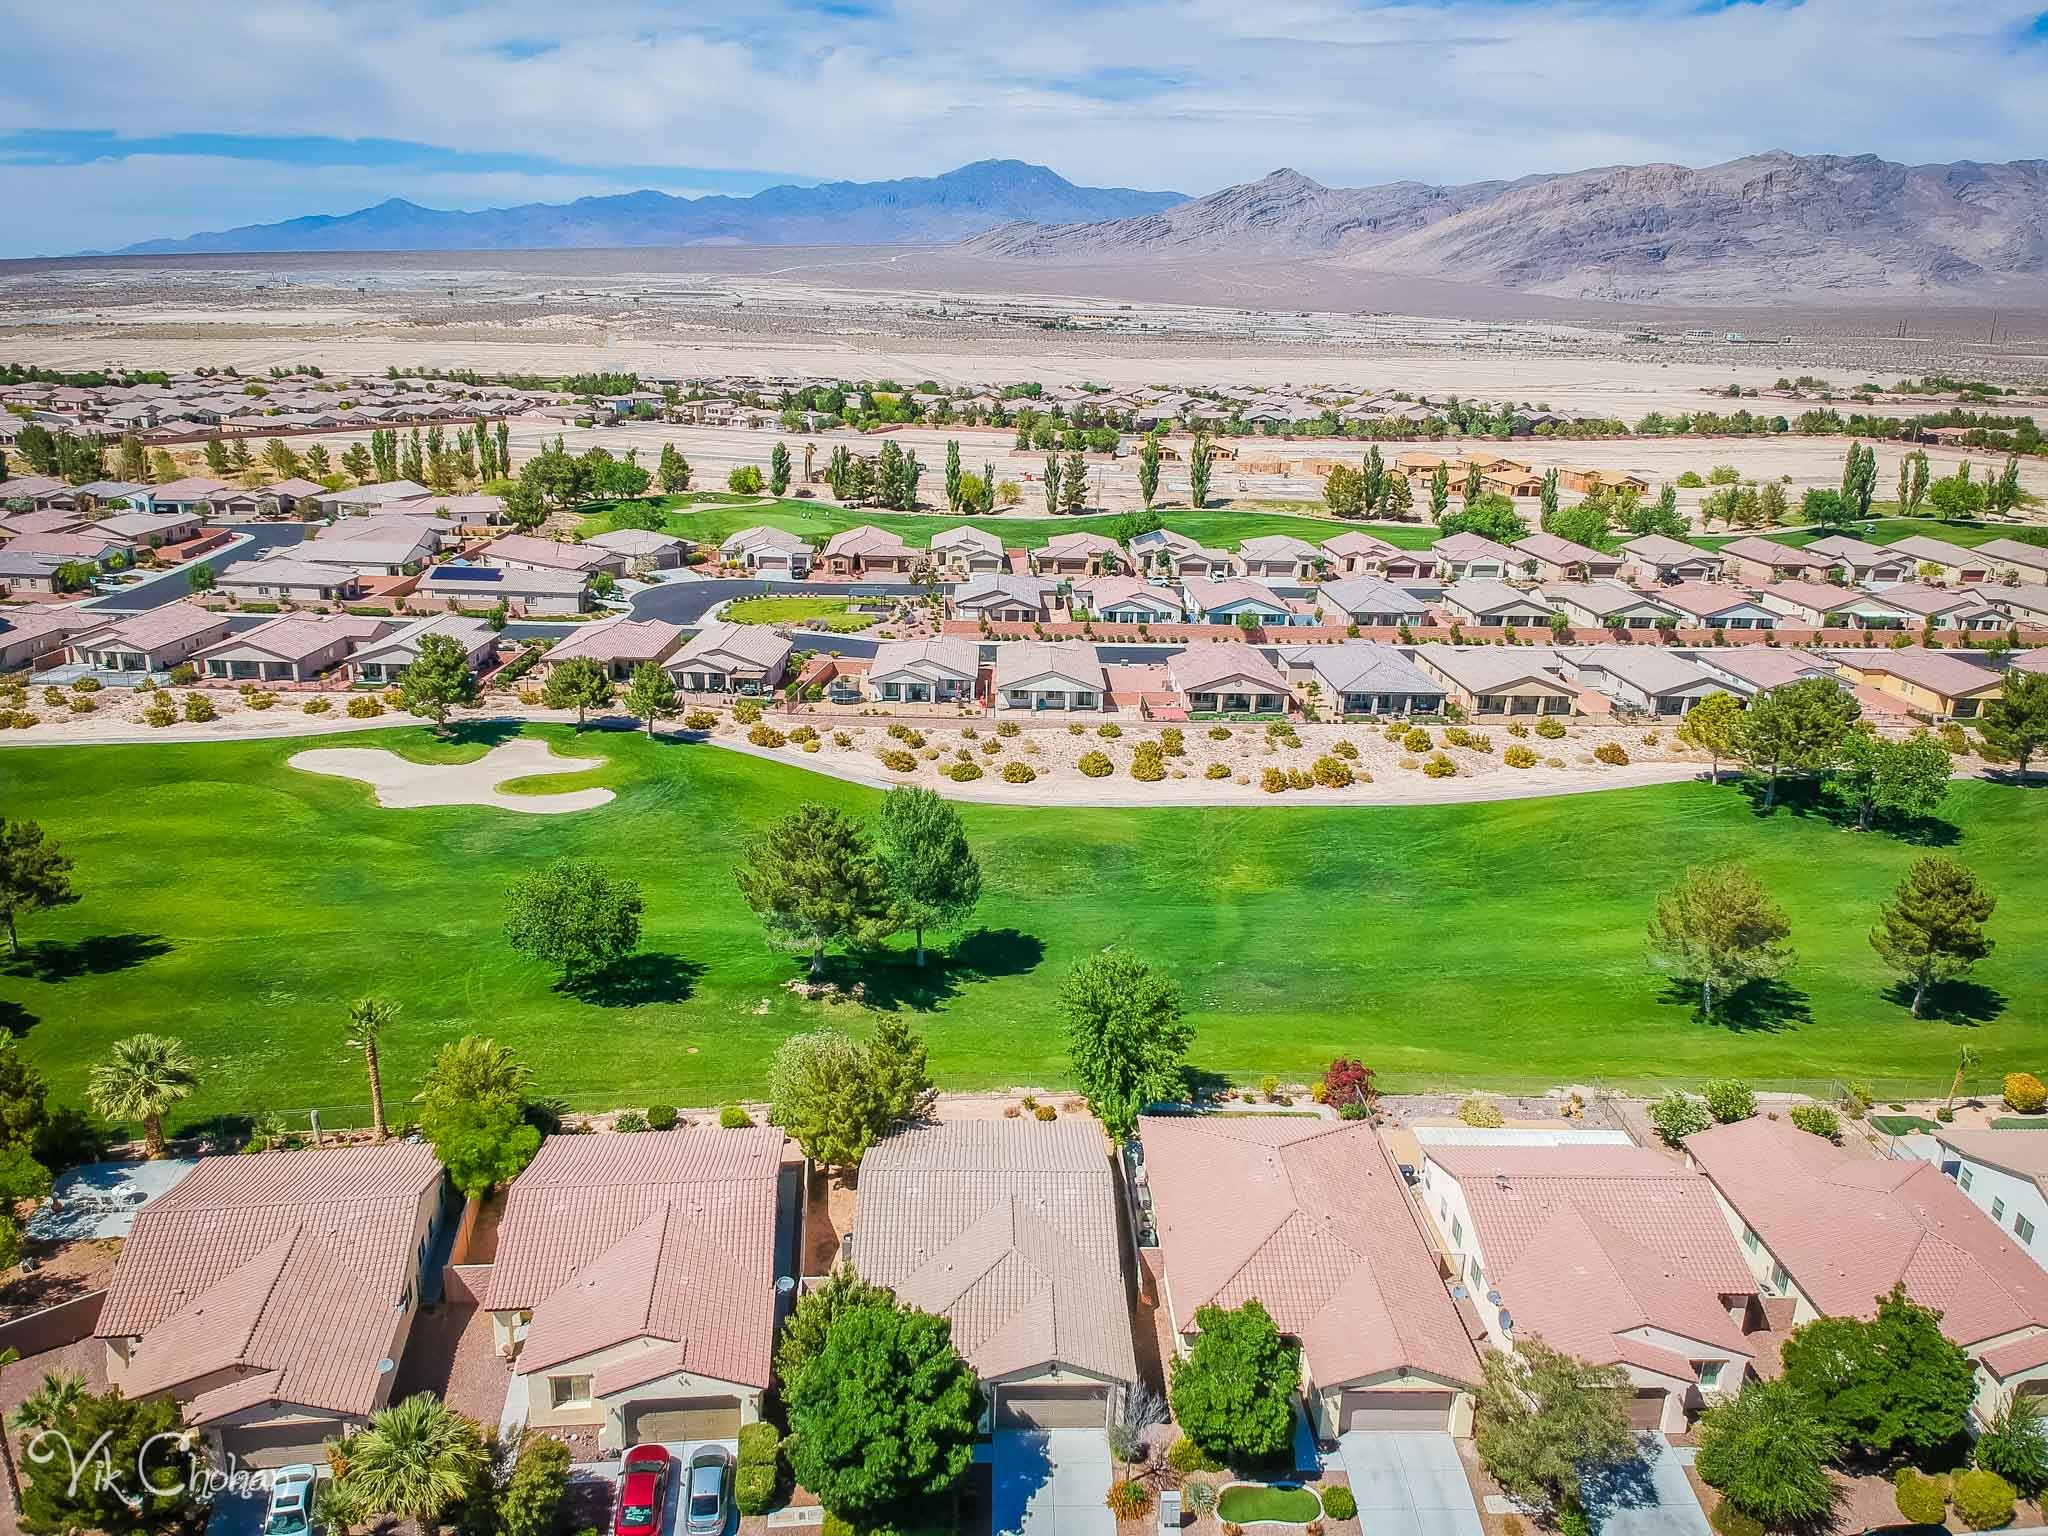 2022-05-15-5378-E-Cansano-St-Pahrump-Real-Estate-Photography-Virtual-Tour-Drone-Photography-Vik-Chohan-Photography-Photo-Booth-Social-Media-VCP-126.jpg